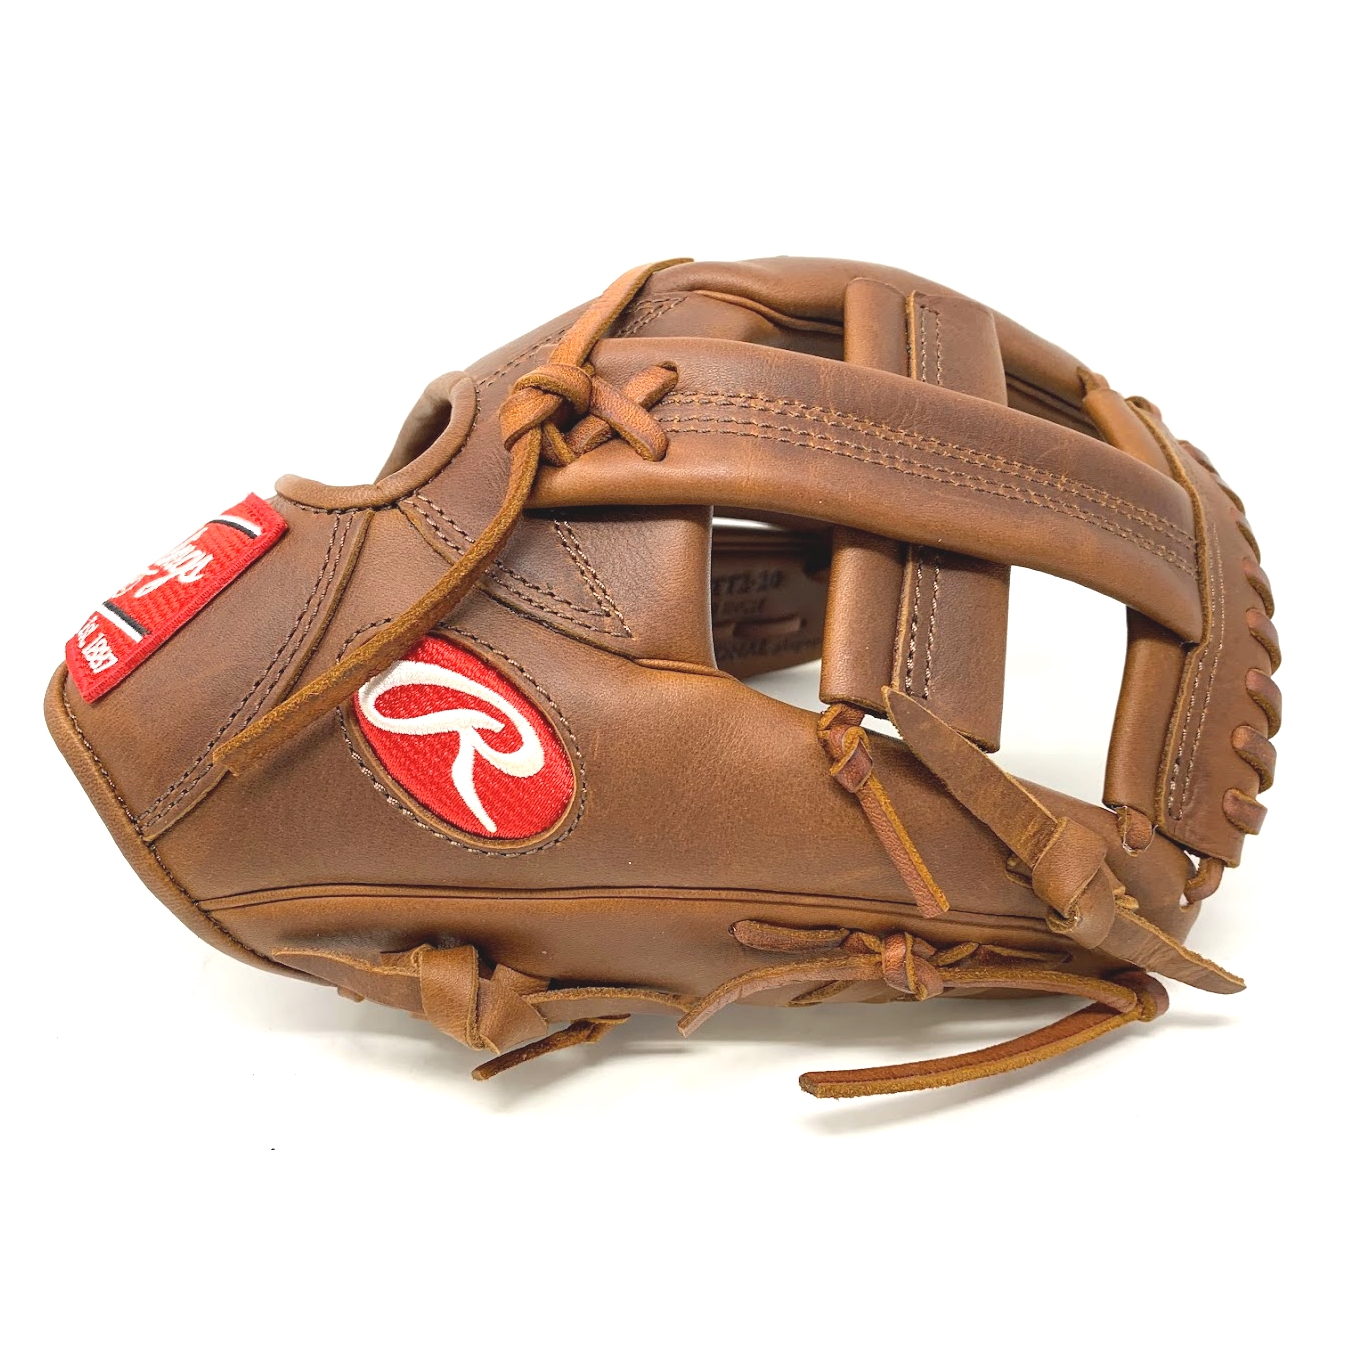 rawlings-heart-of-the-hide-pro-tt2-baseball-glove-11-5-timberglaze-timberglaze-right-hand-throw PROTT2-TI-RightHandThrow Rawlings  <p>Take the field with this limited make up Rawlings Heart of